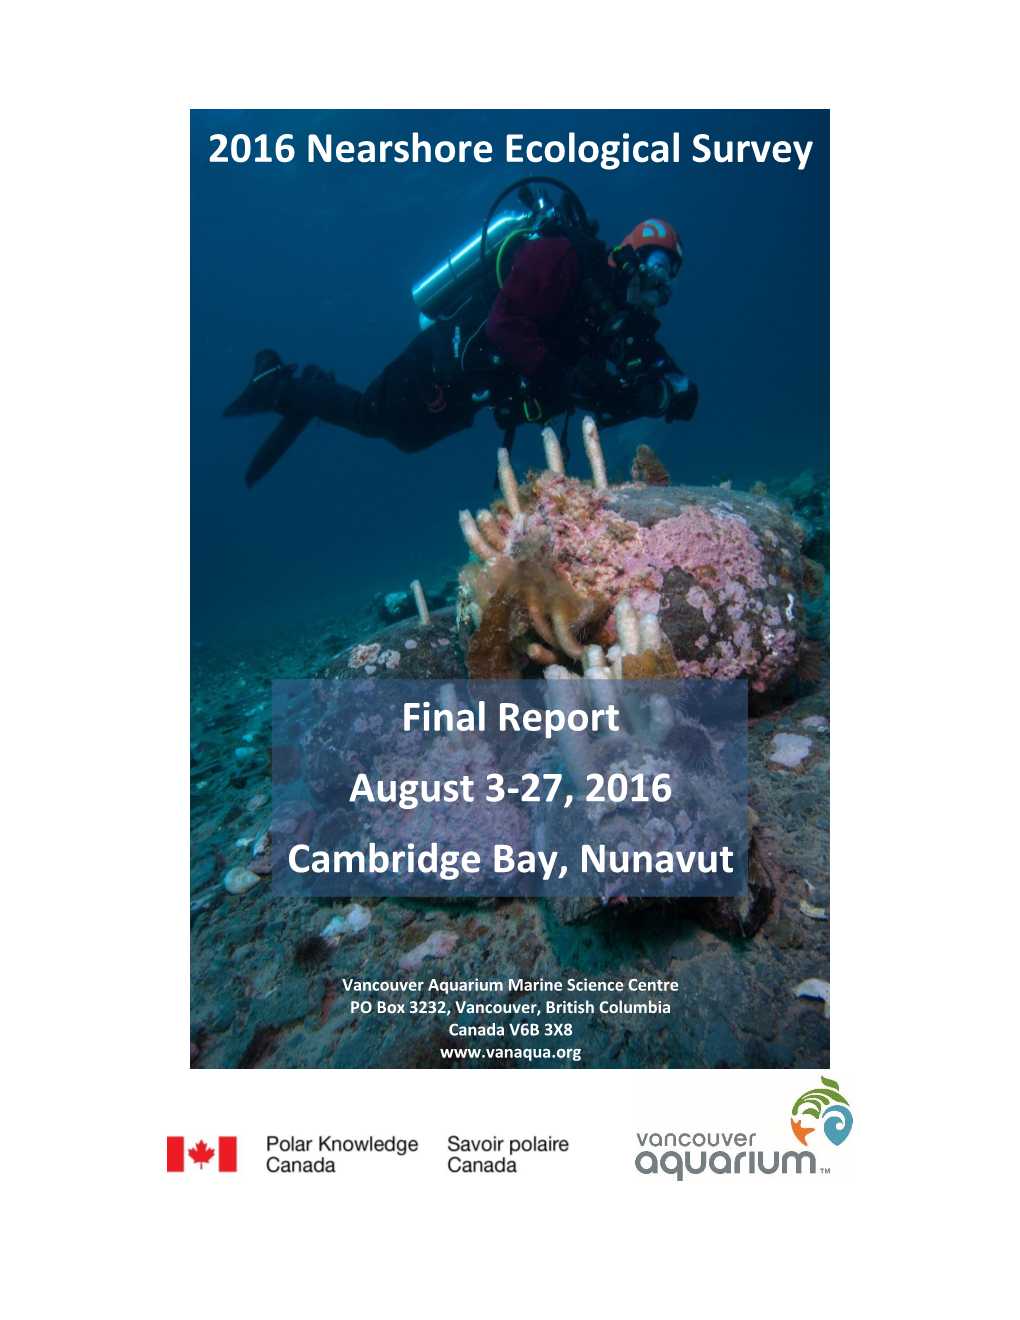 2016 Nearshore Ecological Survey Final Report August 3-27, 2016